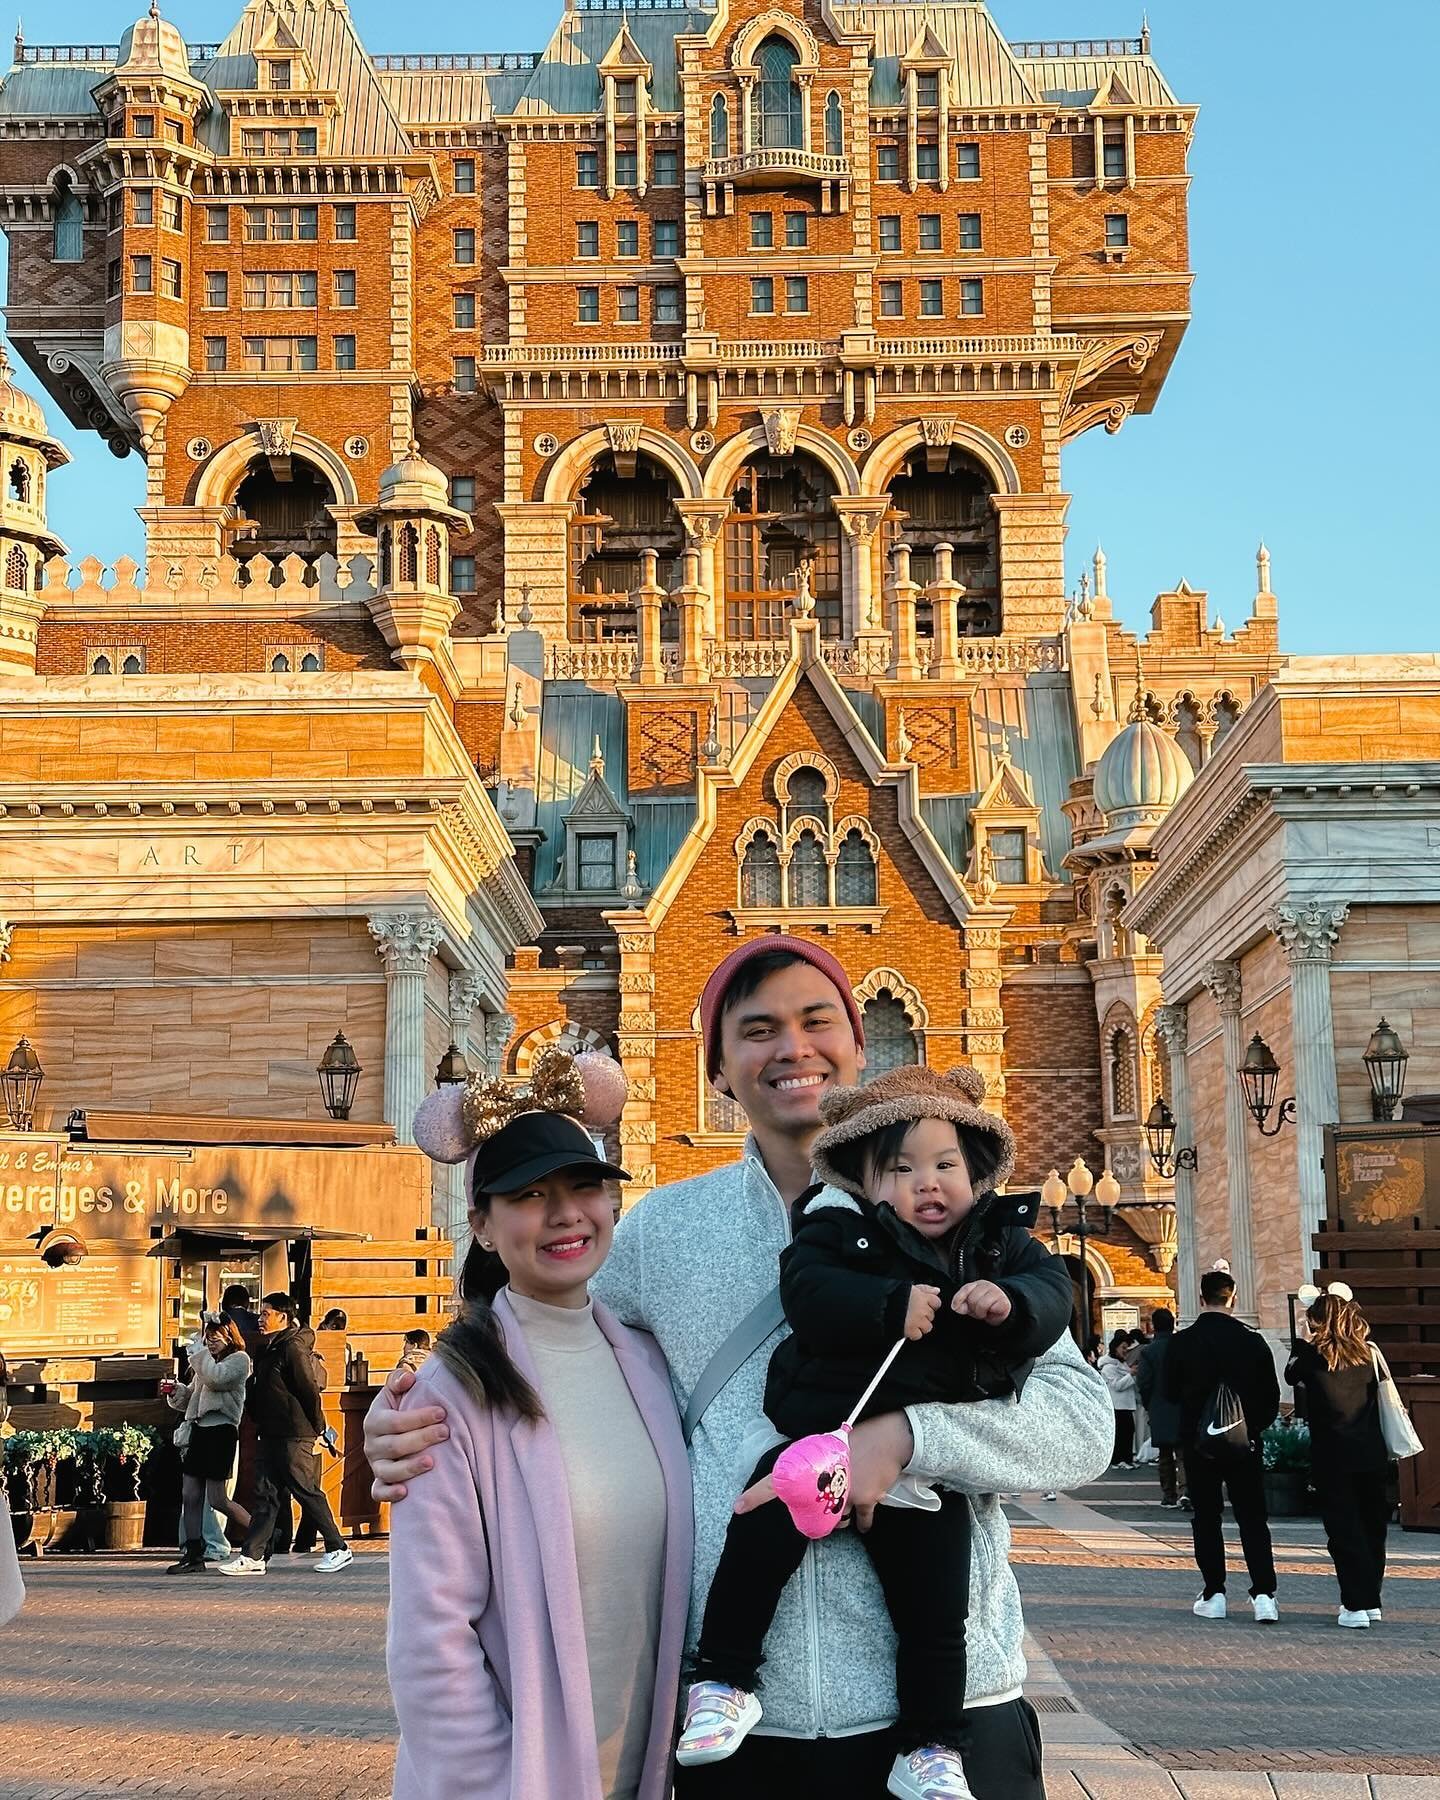 Some of our most favorite snaps at Tokyo DisneySea with our little Skylar! 🌎 This day was truly one for the books, filled with laughter and wonder. We&rsquo;ll always cherish this first-time experience and hold these memories close to our hearts. 💕